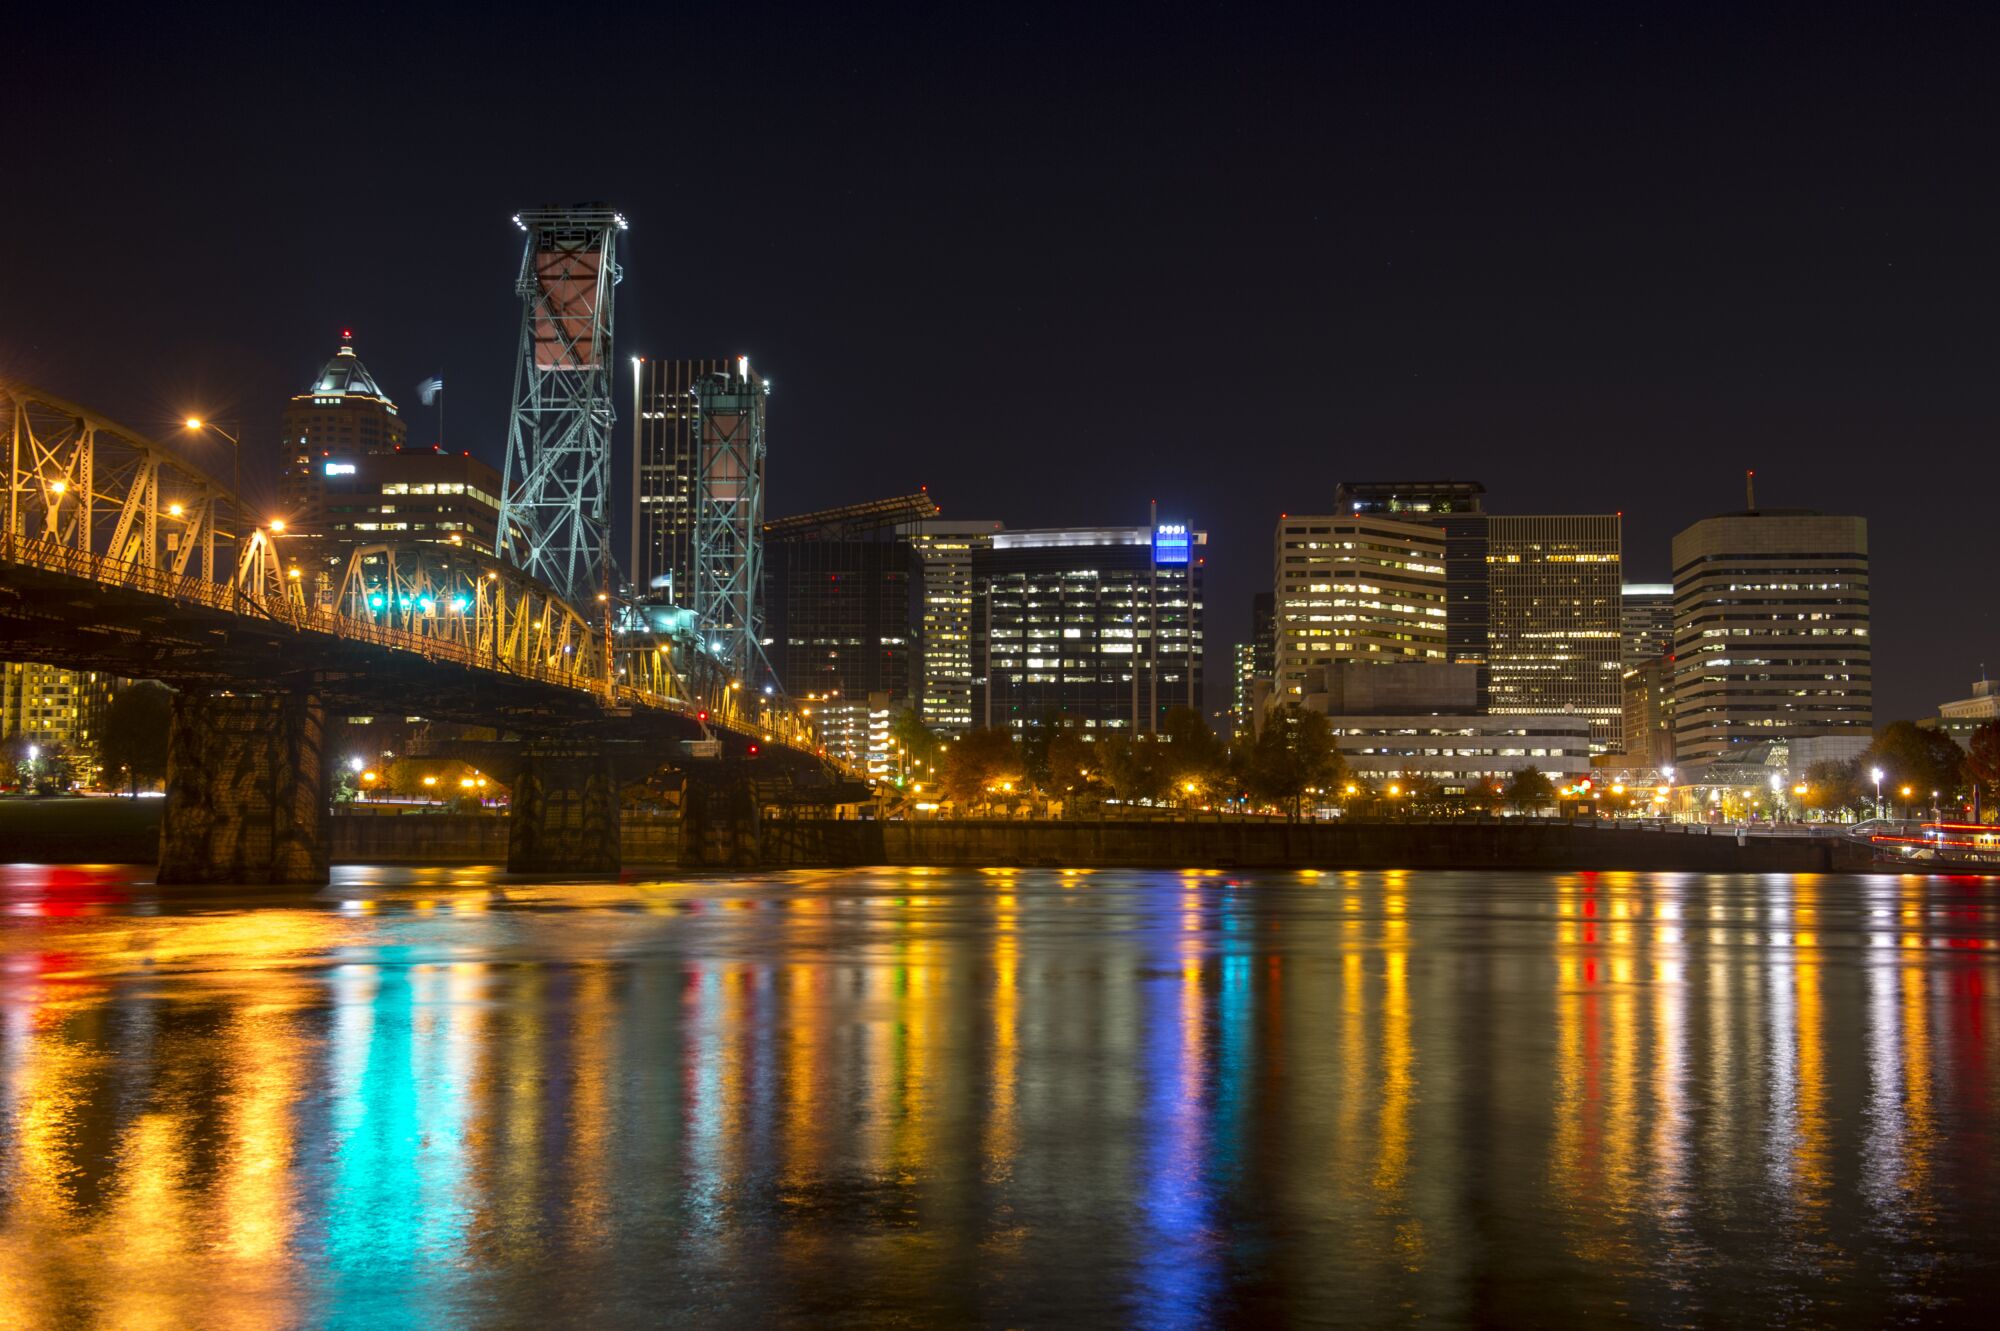 The lights of the downtown Portland skyline, seen at night next to the Hawthorne Bridge, reflected by the Willamette River